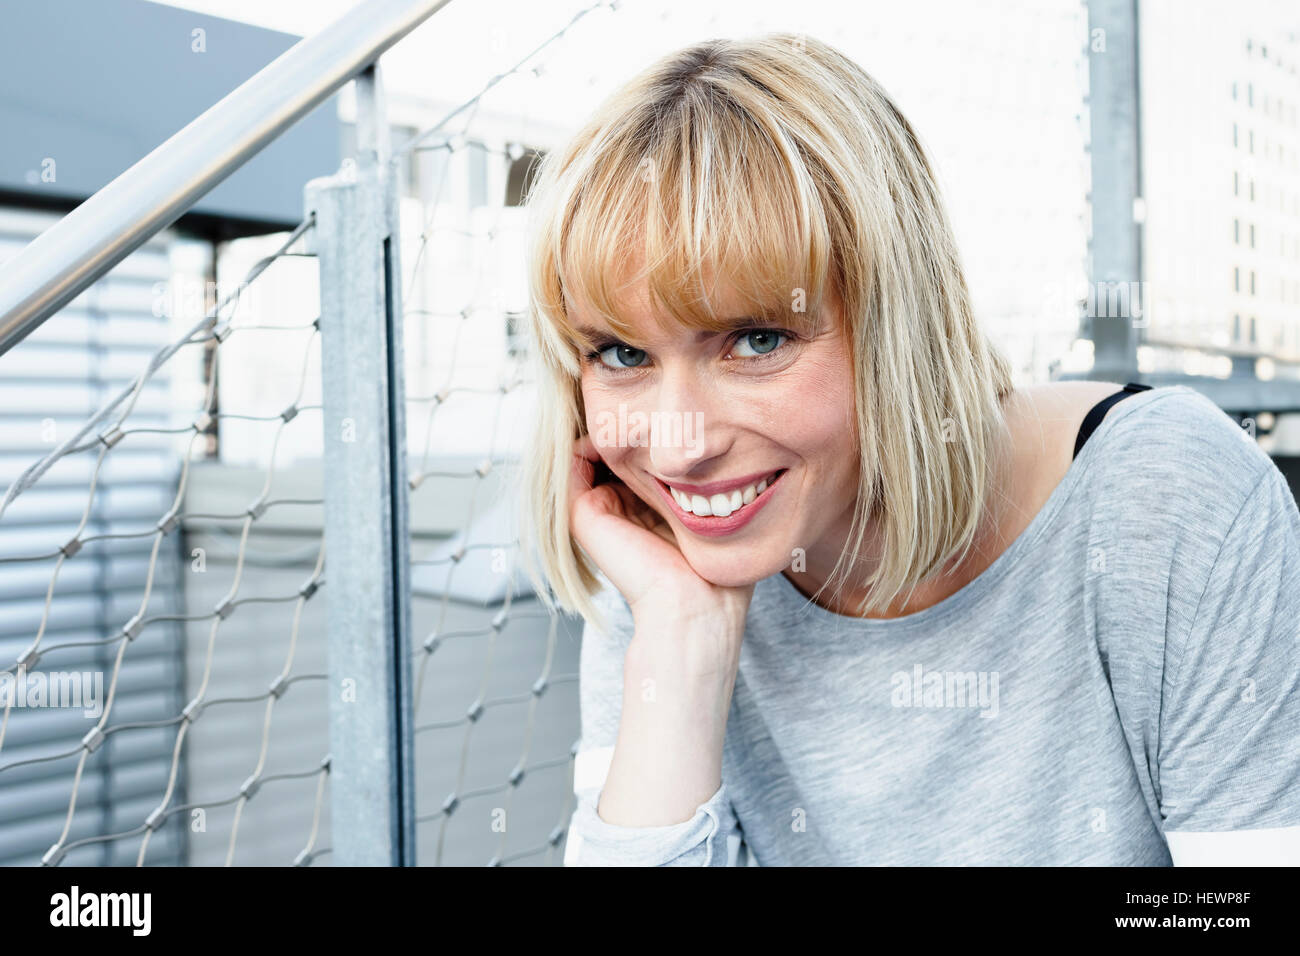 Portrait of blonde haired woman, hand on chin looking at camera smiling Stock Photo